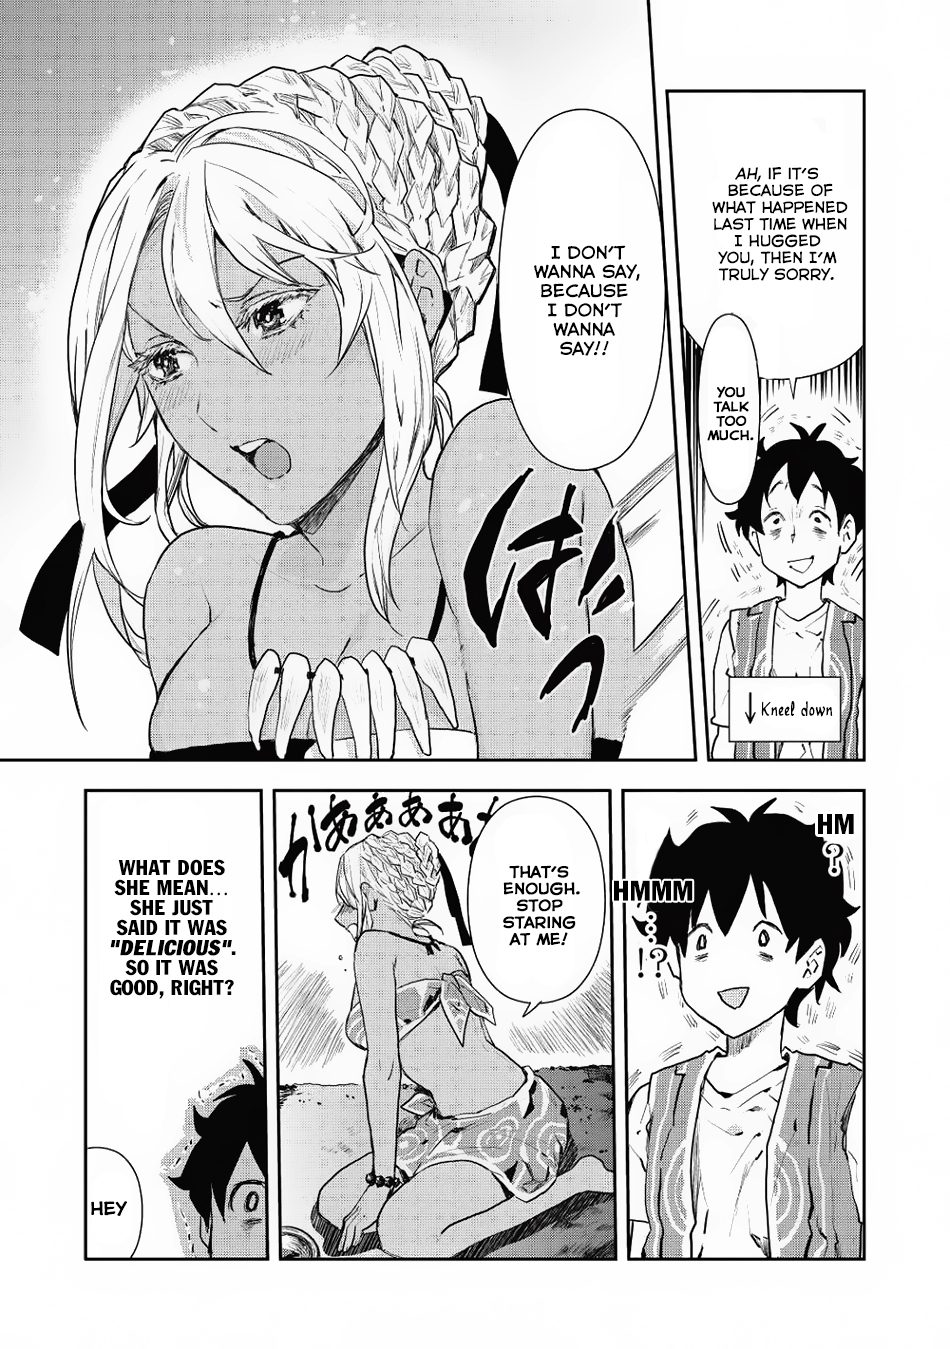 Isekai Ryouridou Vol. 1 Ch. 5 The Little Guest